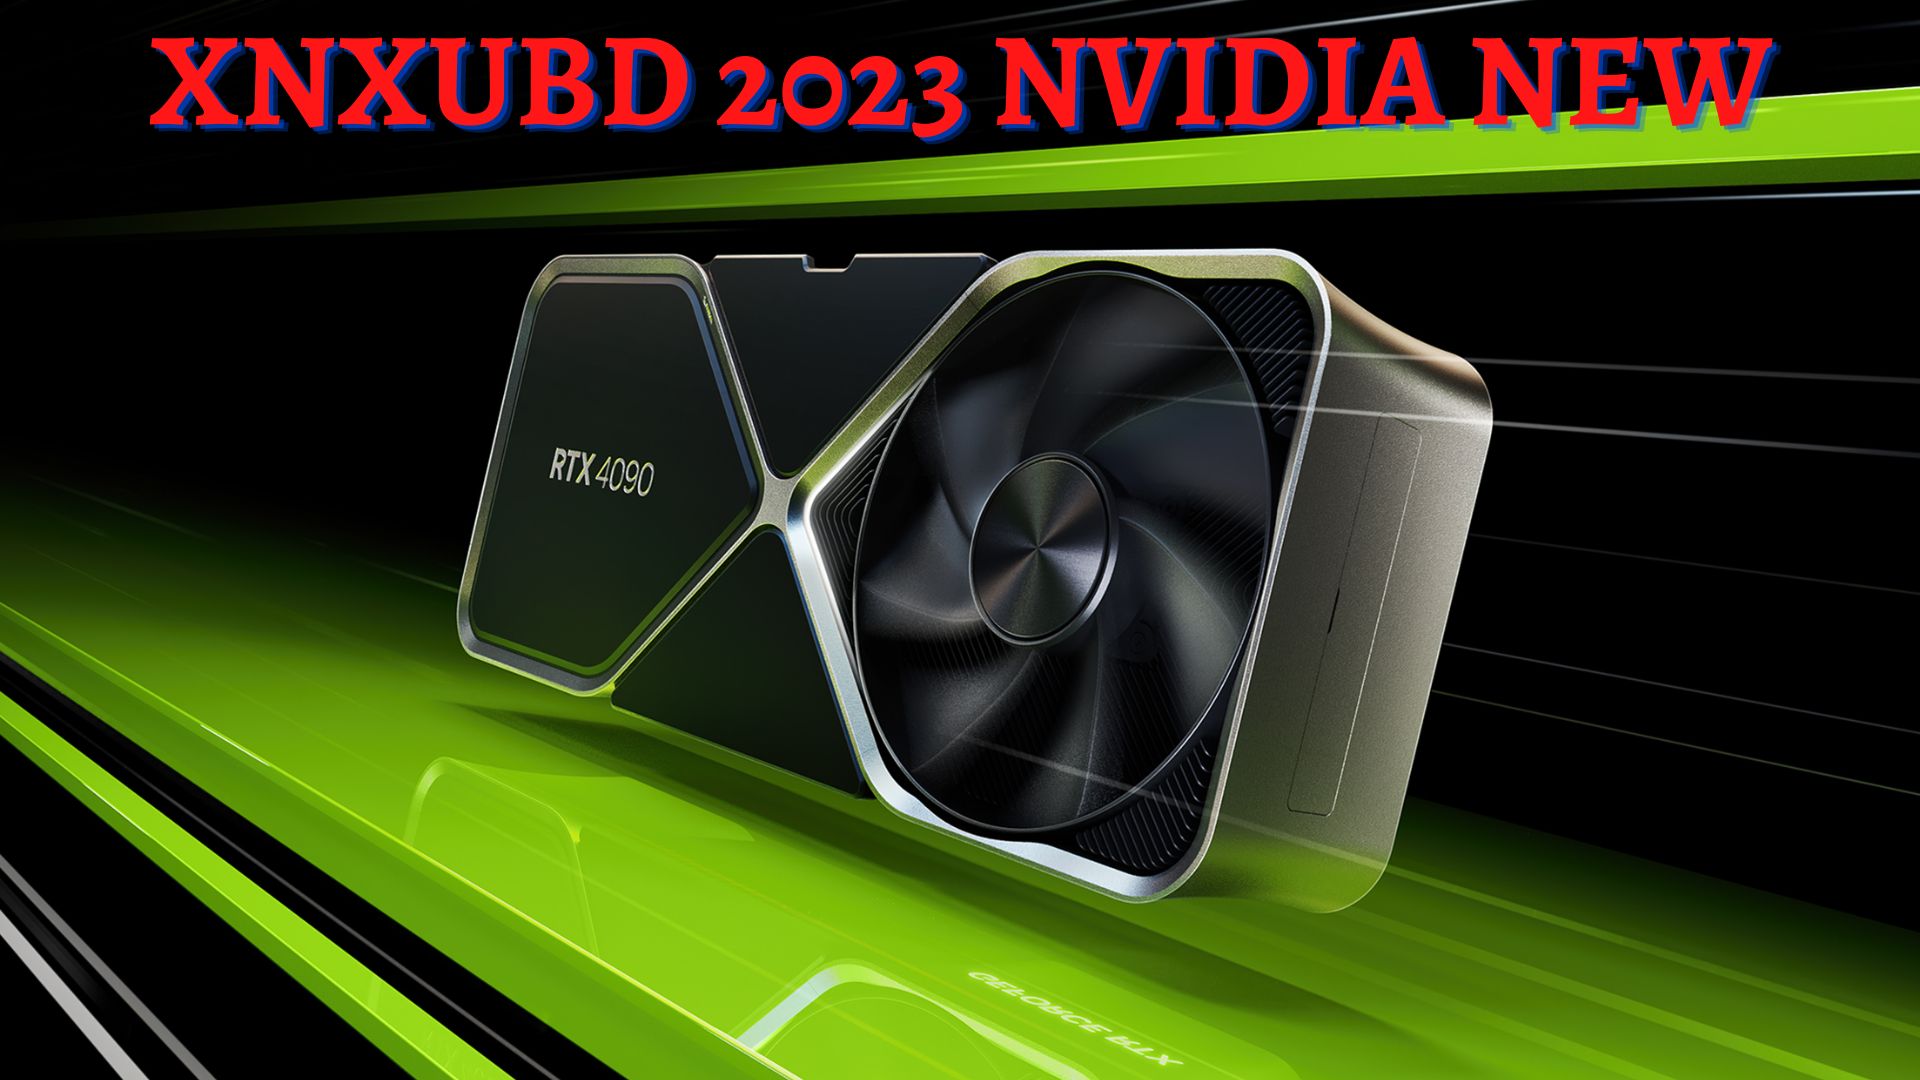 Xnxubd 2023 Nvidia New text on the background of RTX-4090